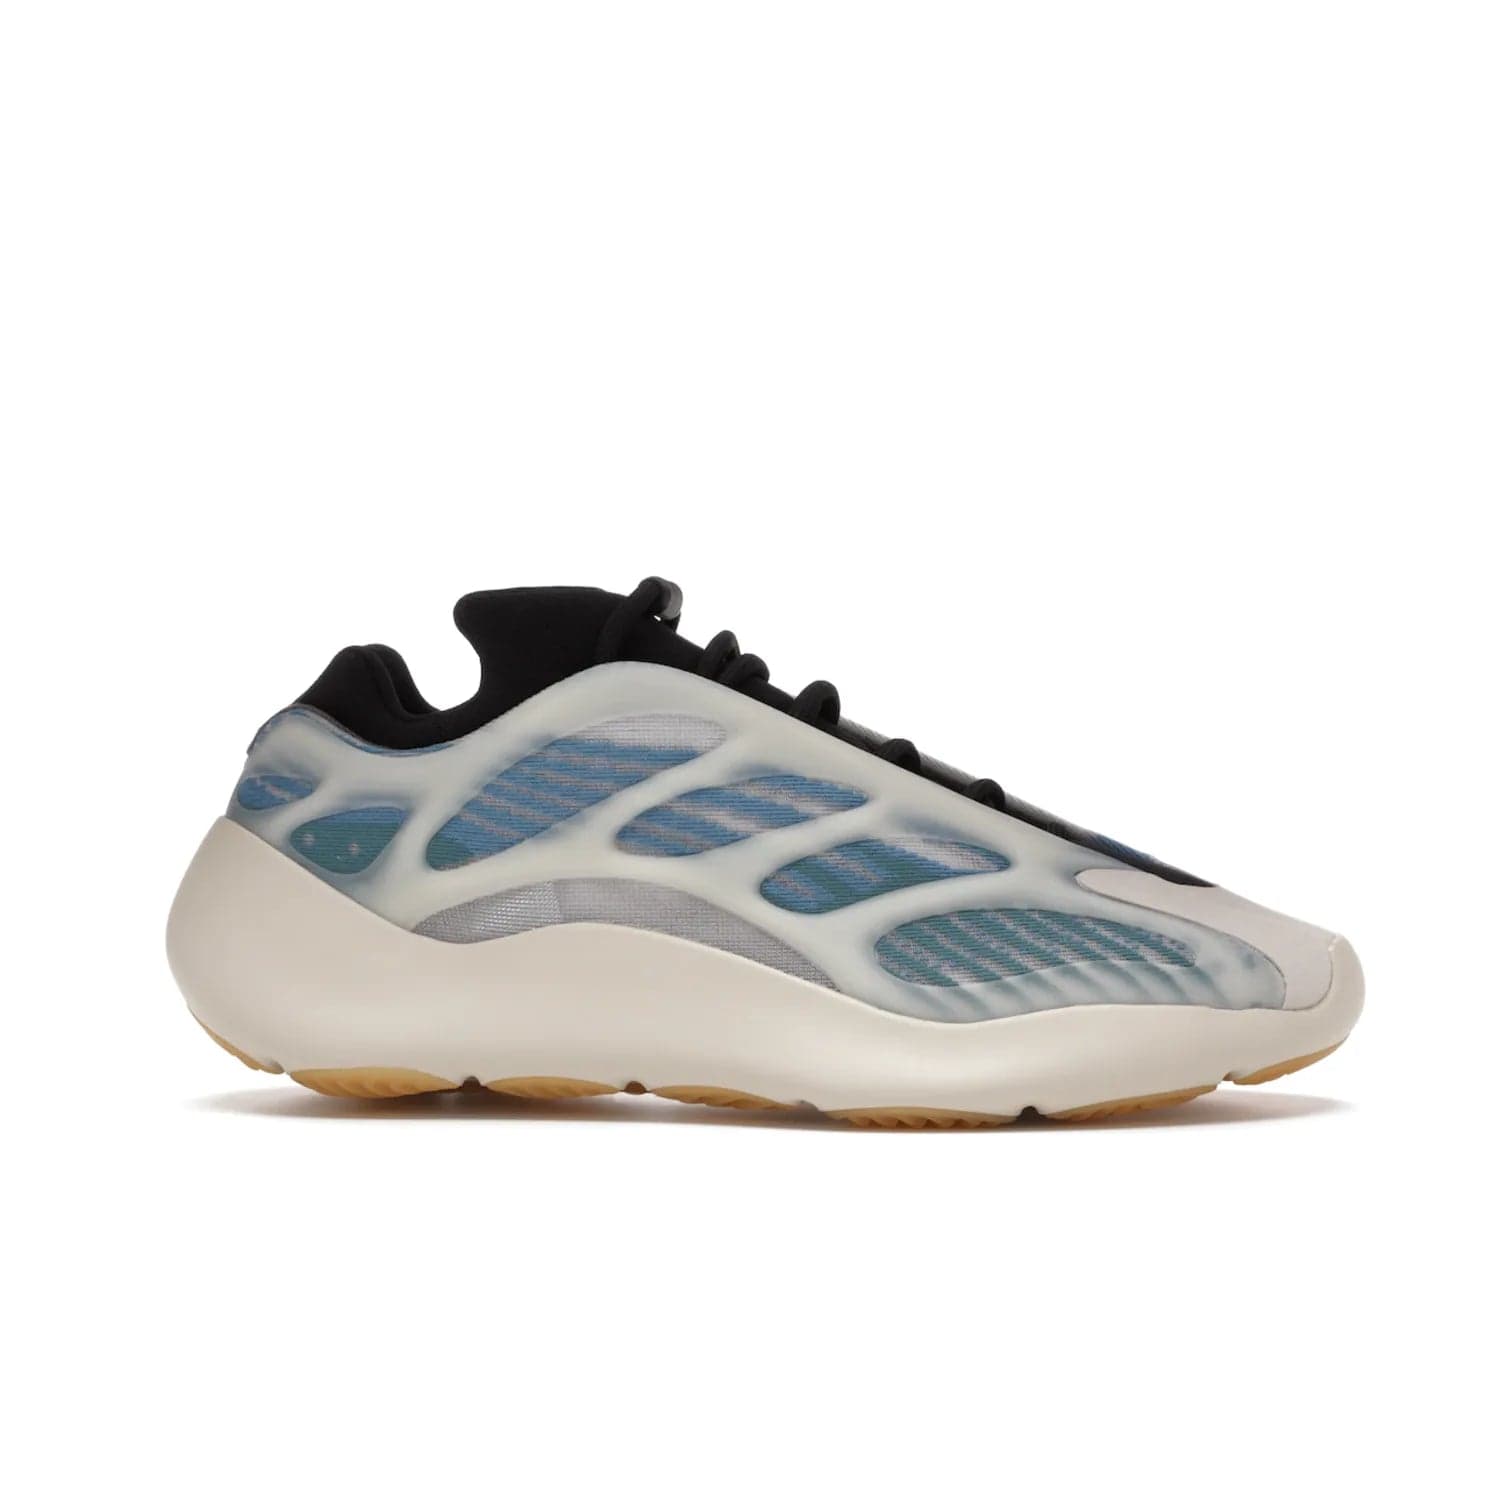 adidas Yeezy 700 V3 Kyanite - Image 2 - Only at www.BallersClubKickz.com - The adidas Yeezy 700 V3 Kyanite offers a layered design featuring a glow-in-the-dark TPU cage and a tonal cream-colored EVA foam midsole. With its herringbone-patterned outsole, the style and comfort of the sneaker will accompany you anywhere. Released in March 2021, it's a great addition to any sneaker wardrobe.